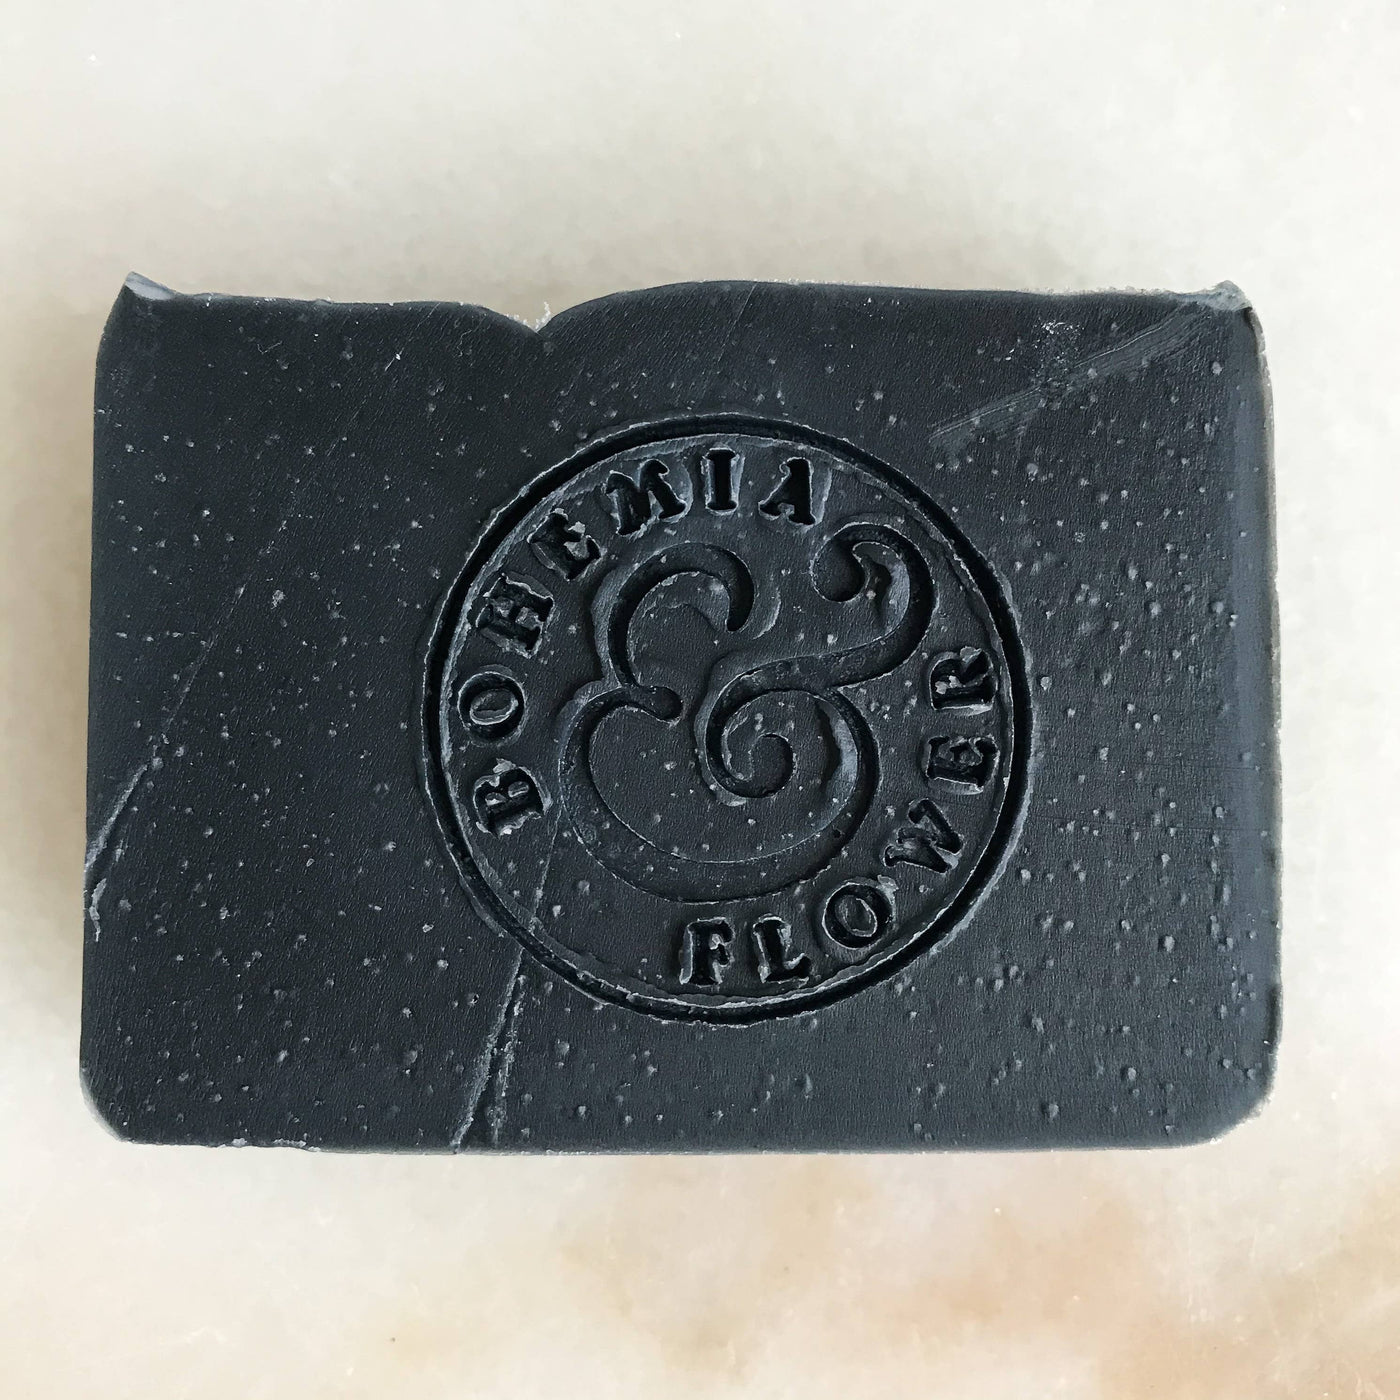 Forest - Activated Charcoal, Cedarwood Rosemary Bar Soap